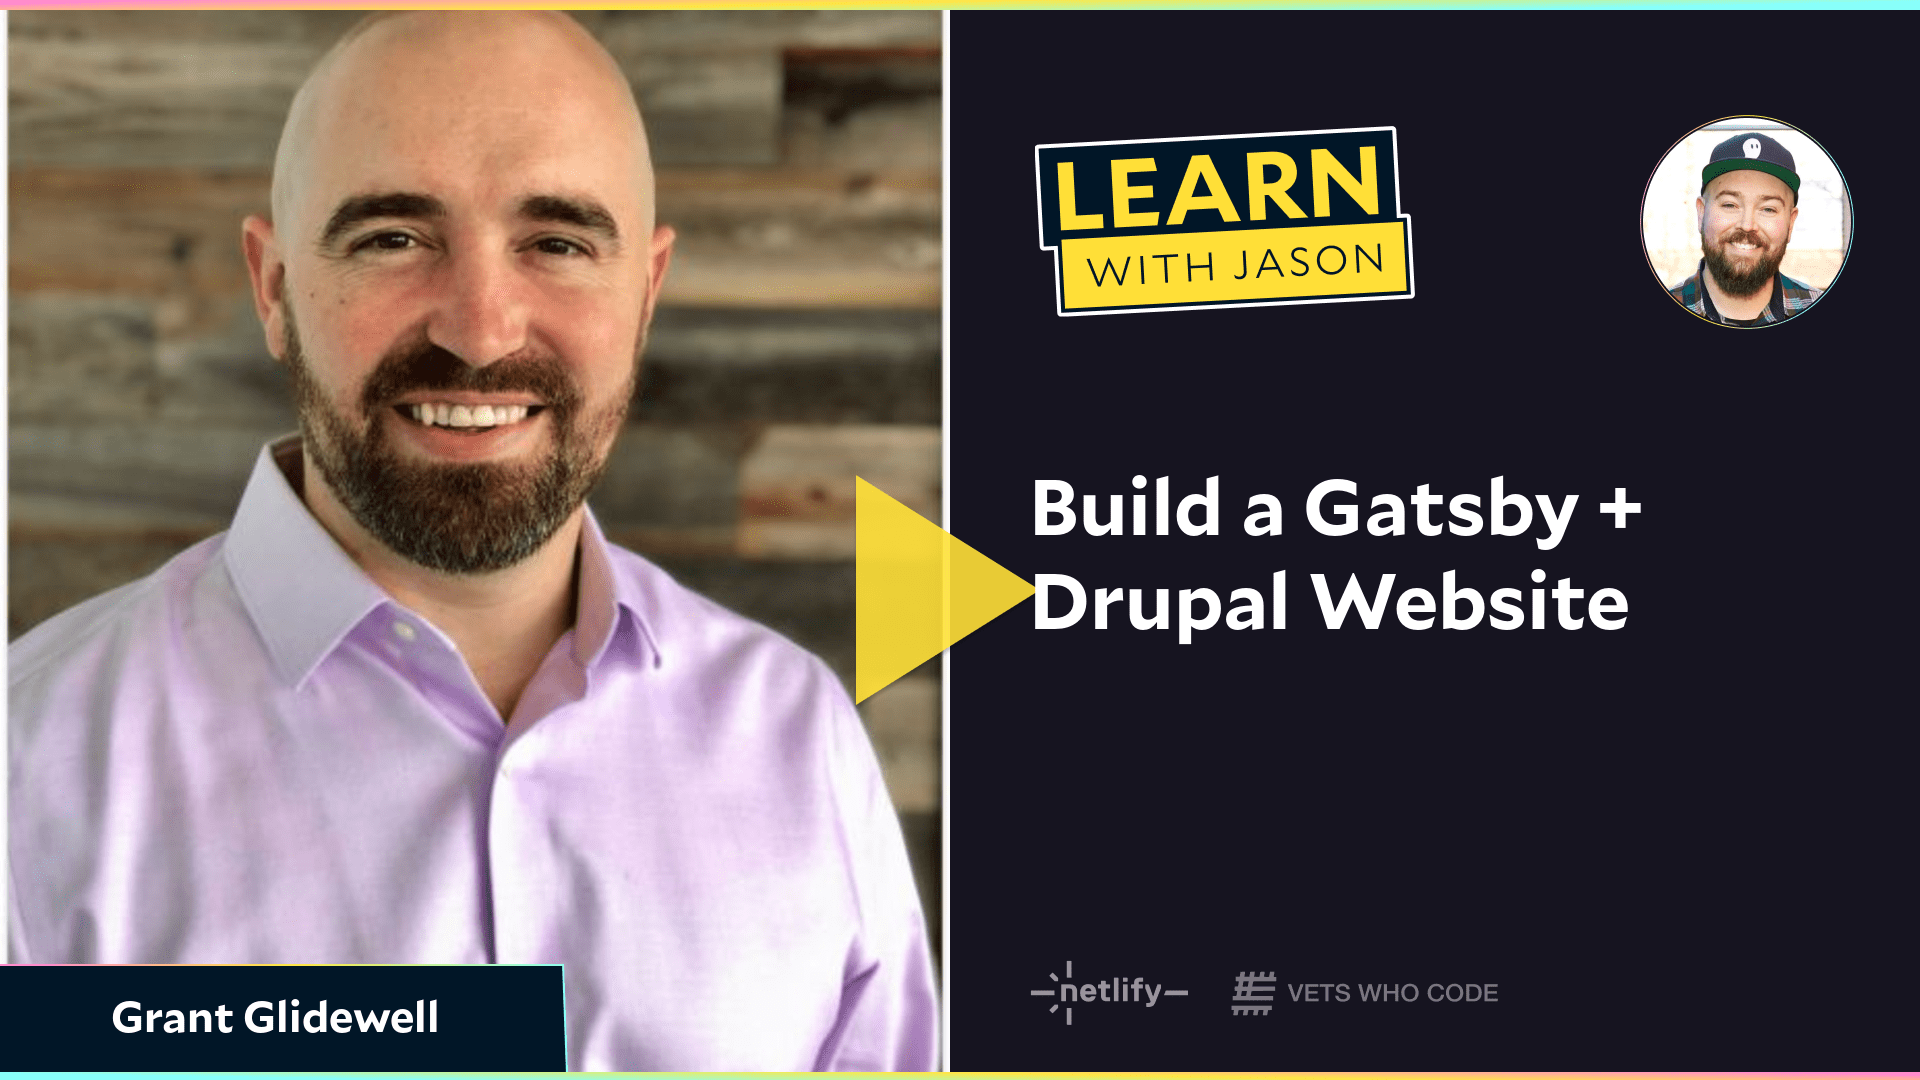 Build a Gatsby + Drupal Website (with Grant Glidewell)